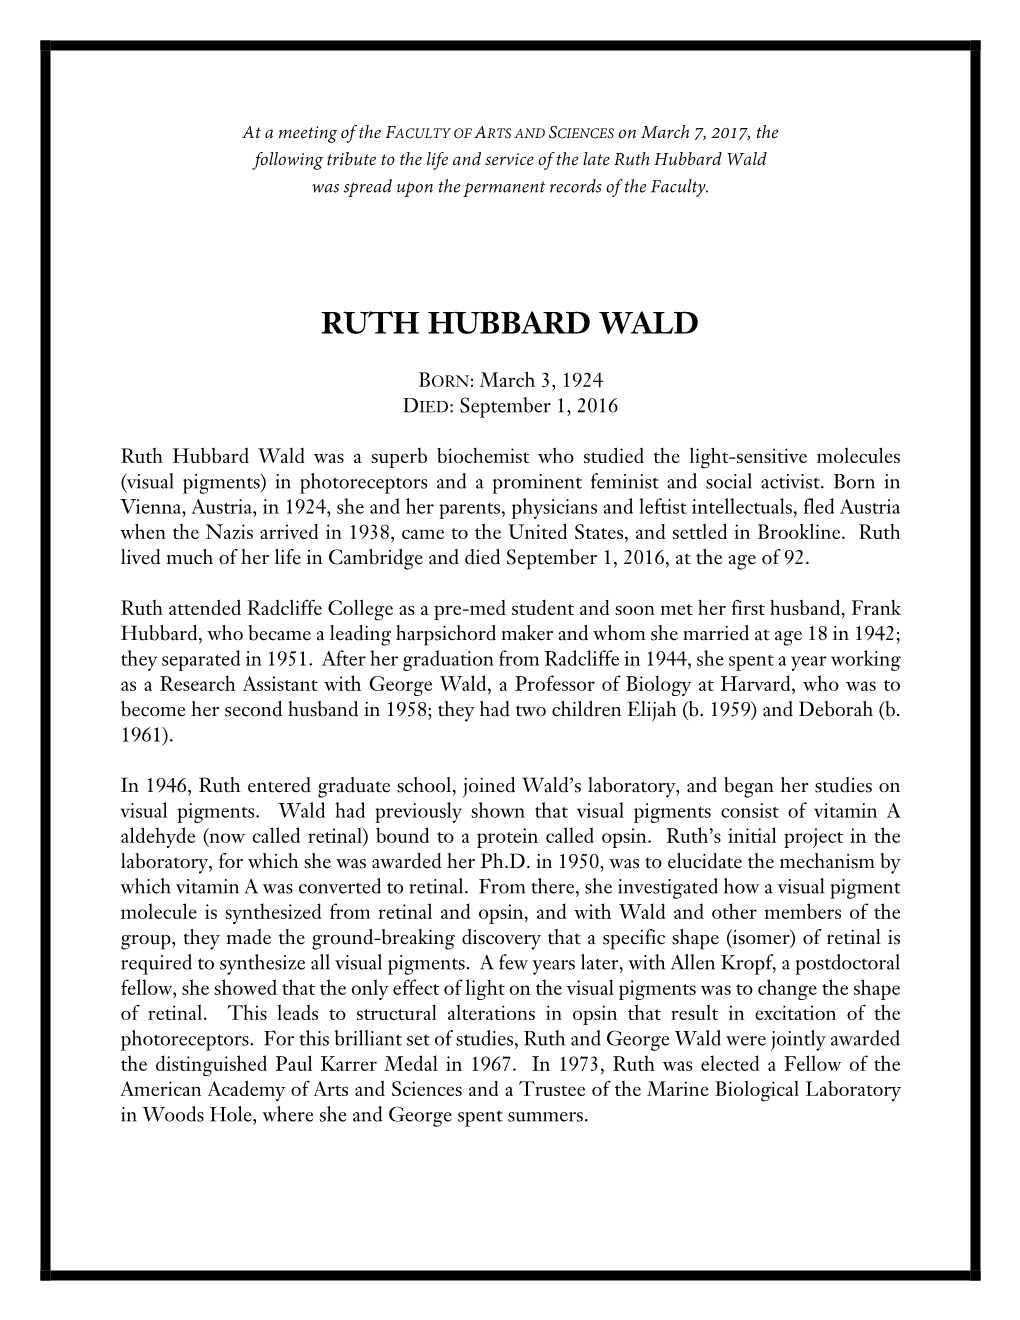 Ruth Hubbard Wald Was Spread Upon the Permanent Records of the Faculty